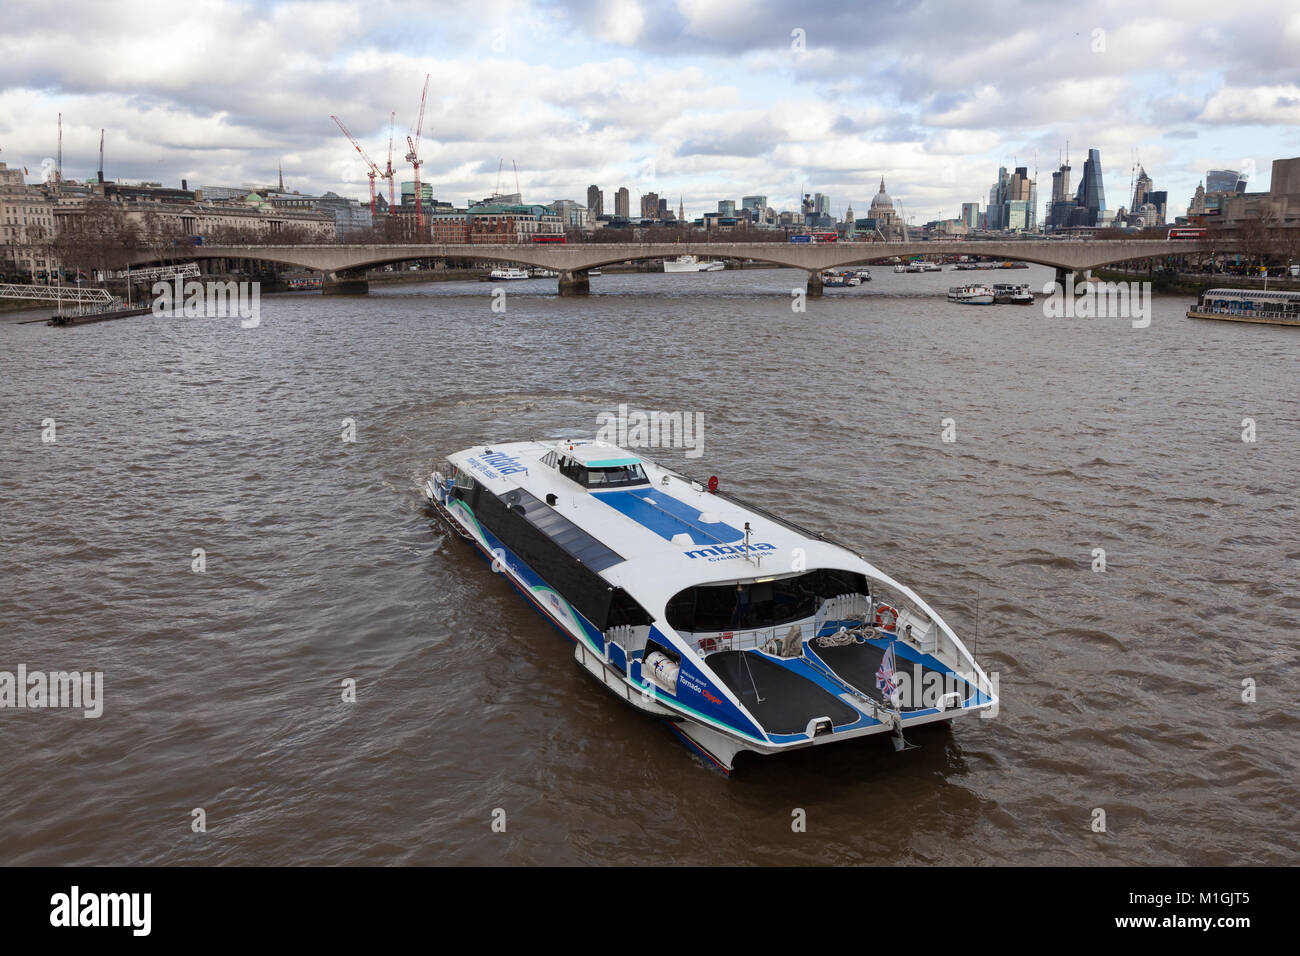 A sight-seeing boat on the River Thames with Waterloo Bridge, St Paul's Cathedral and the skyscrapers of the City's financial district behind. London, Stock Photo